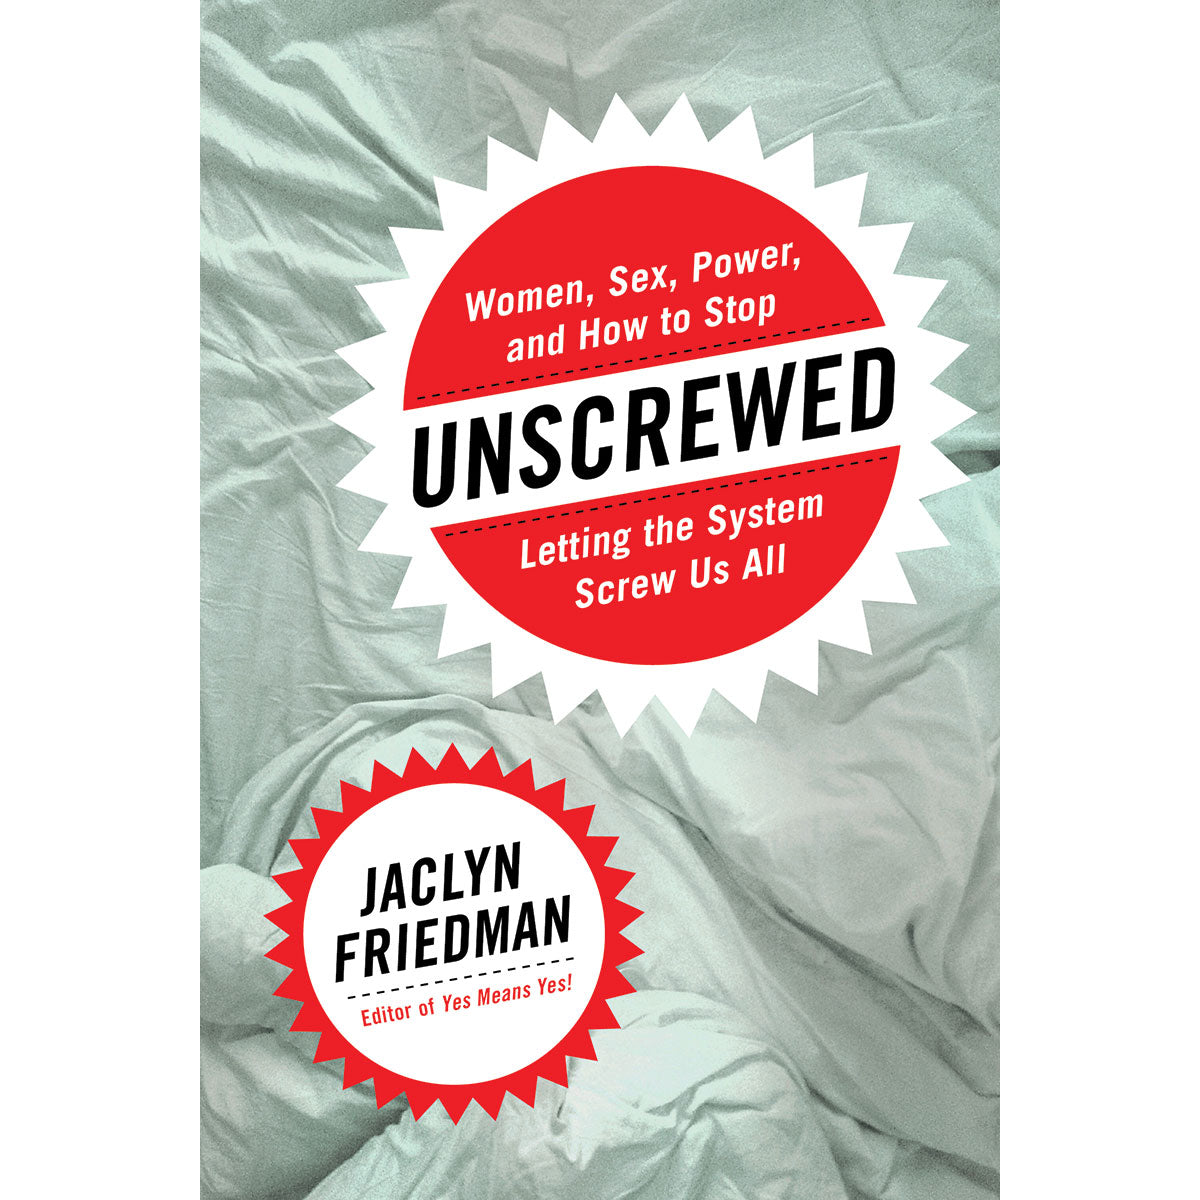 Unscrewed - Women, Sex, Power, and How to Stop Letting the System Screw Us All